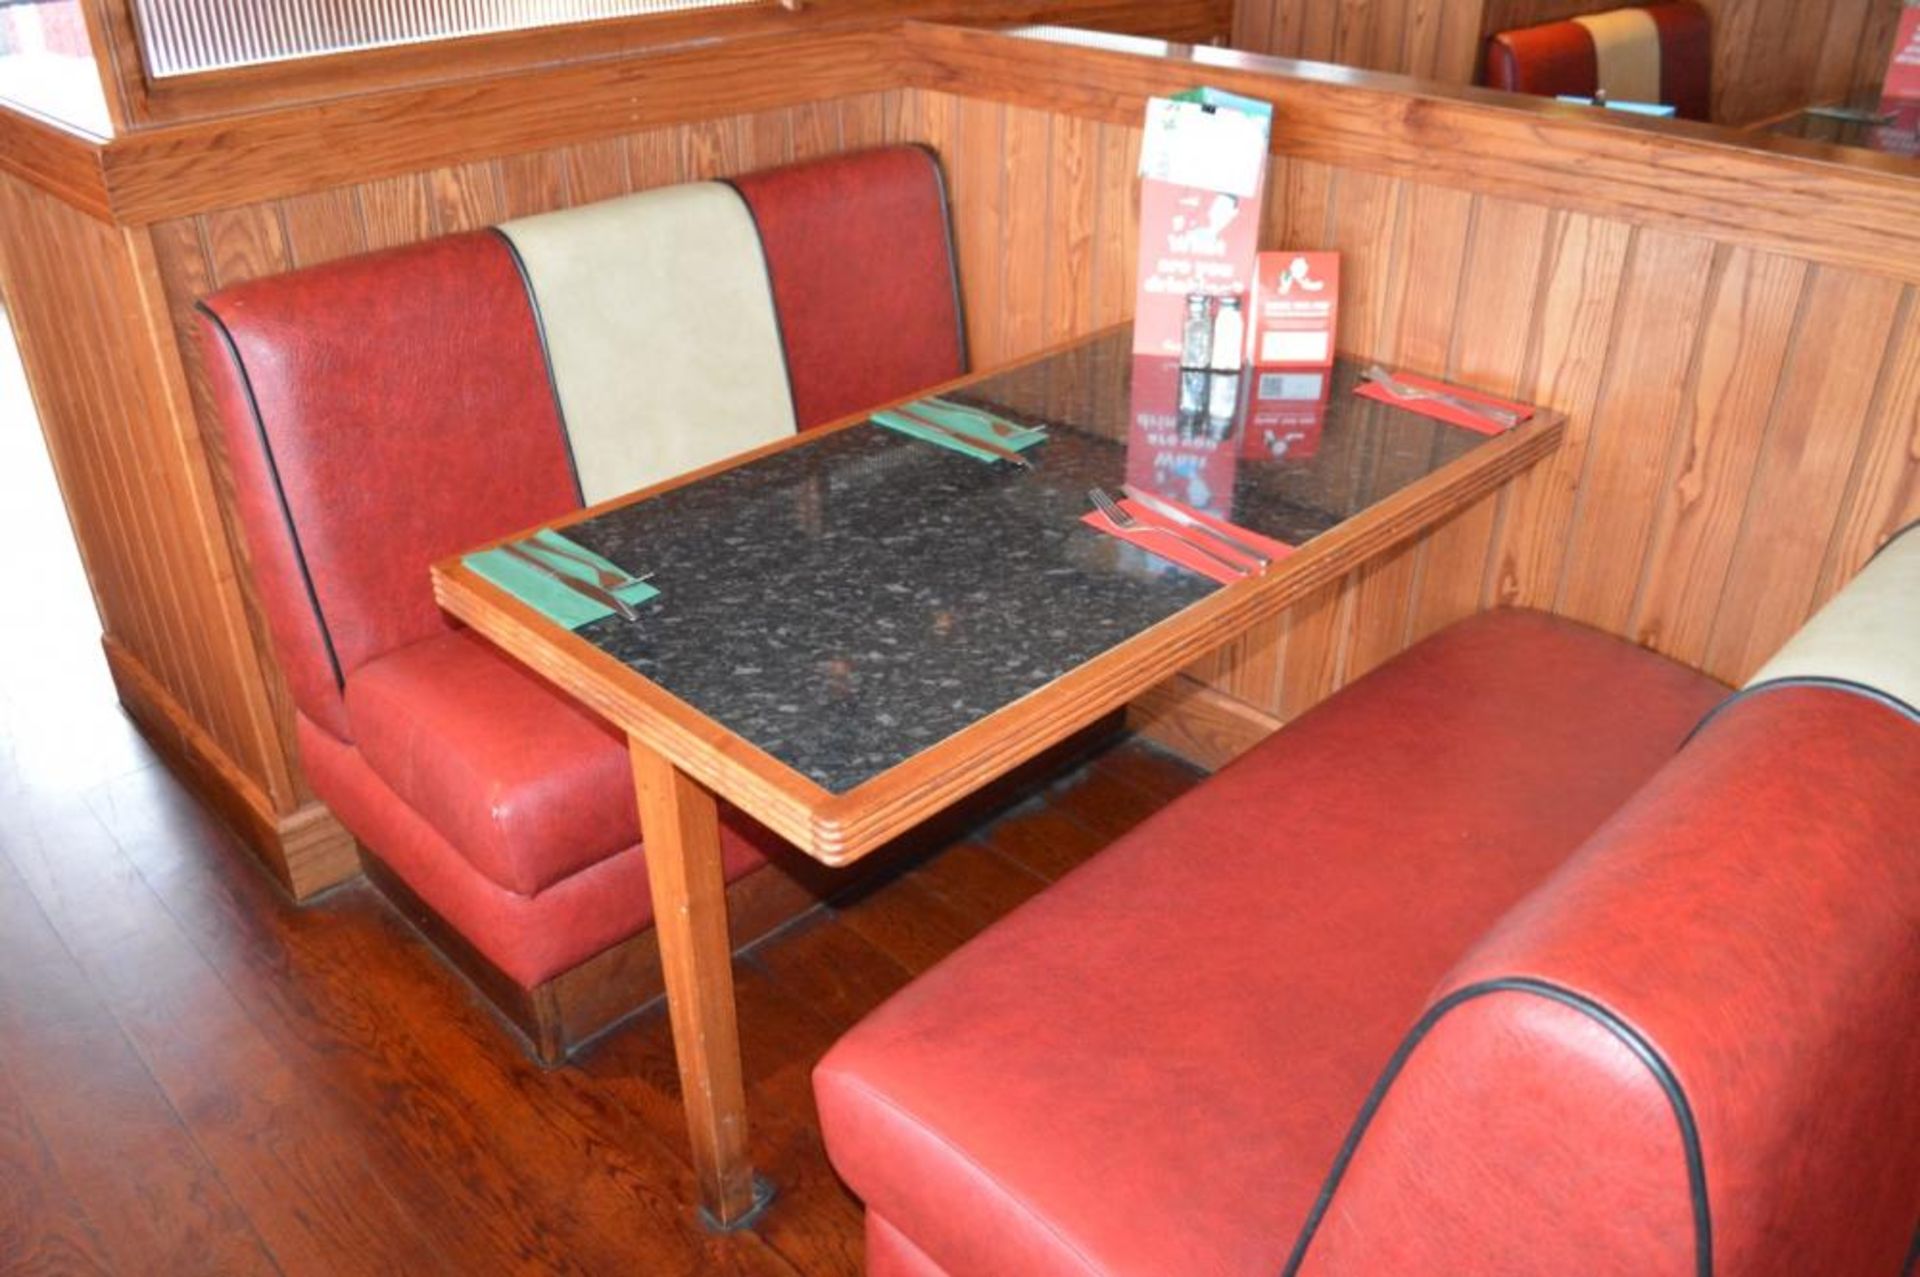 1 x Selection of Cosy Bespoke Seating Booths in a 1950's Retro American Diner Design With Dining Tab - Image 14 of 30